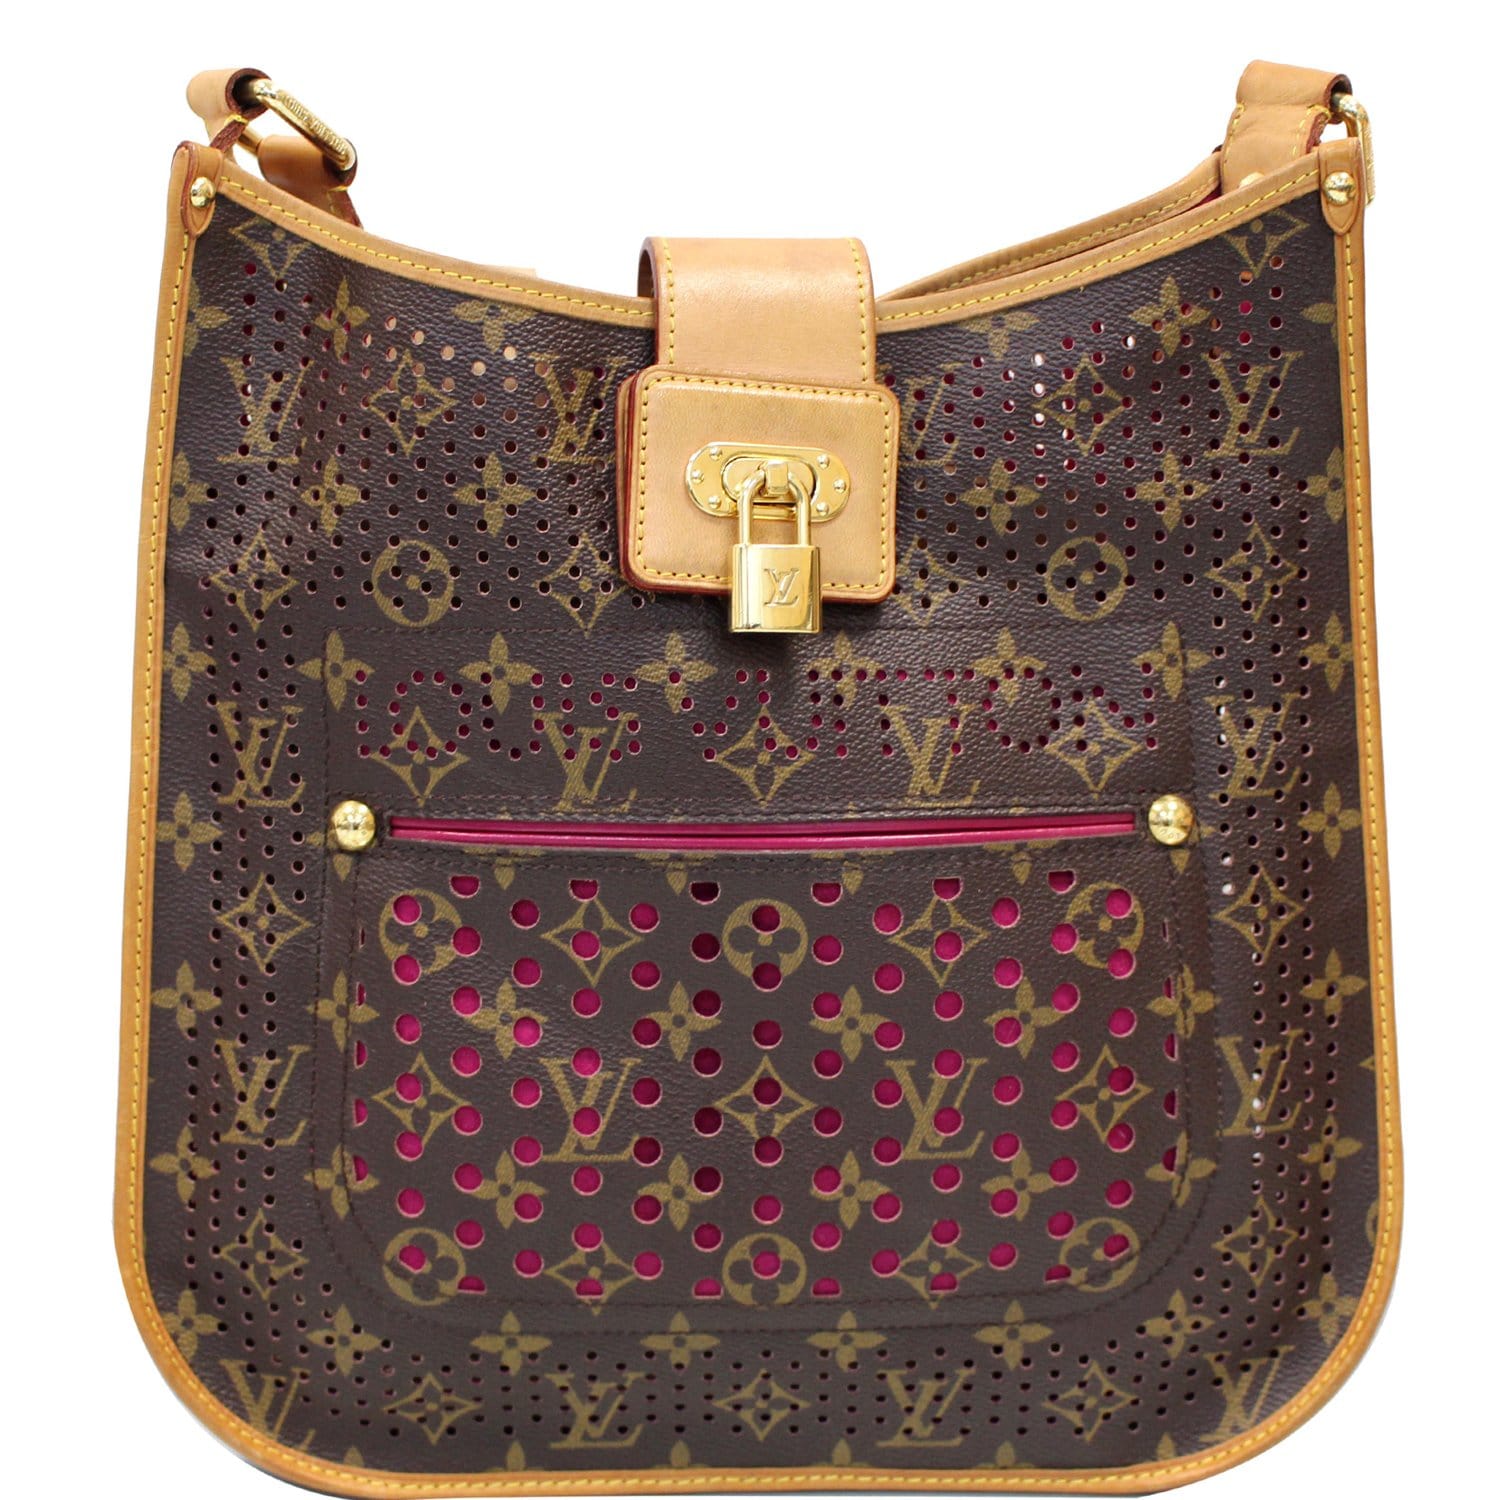 LOUIS VUITTON Perforated Musette Monogram Canvas Crossbody Bag Brown-US